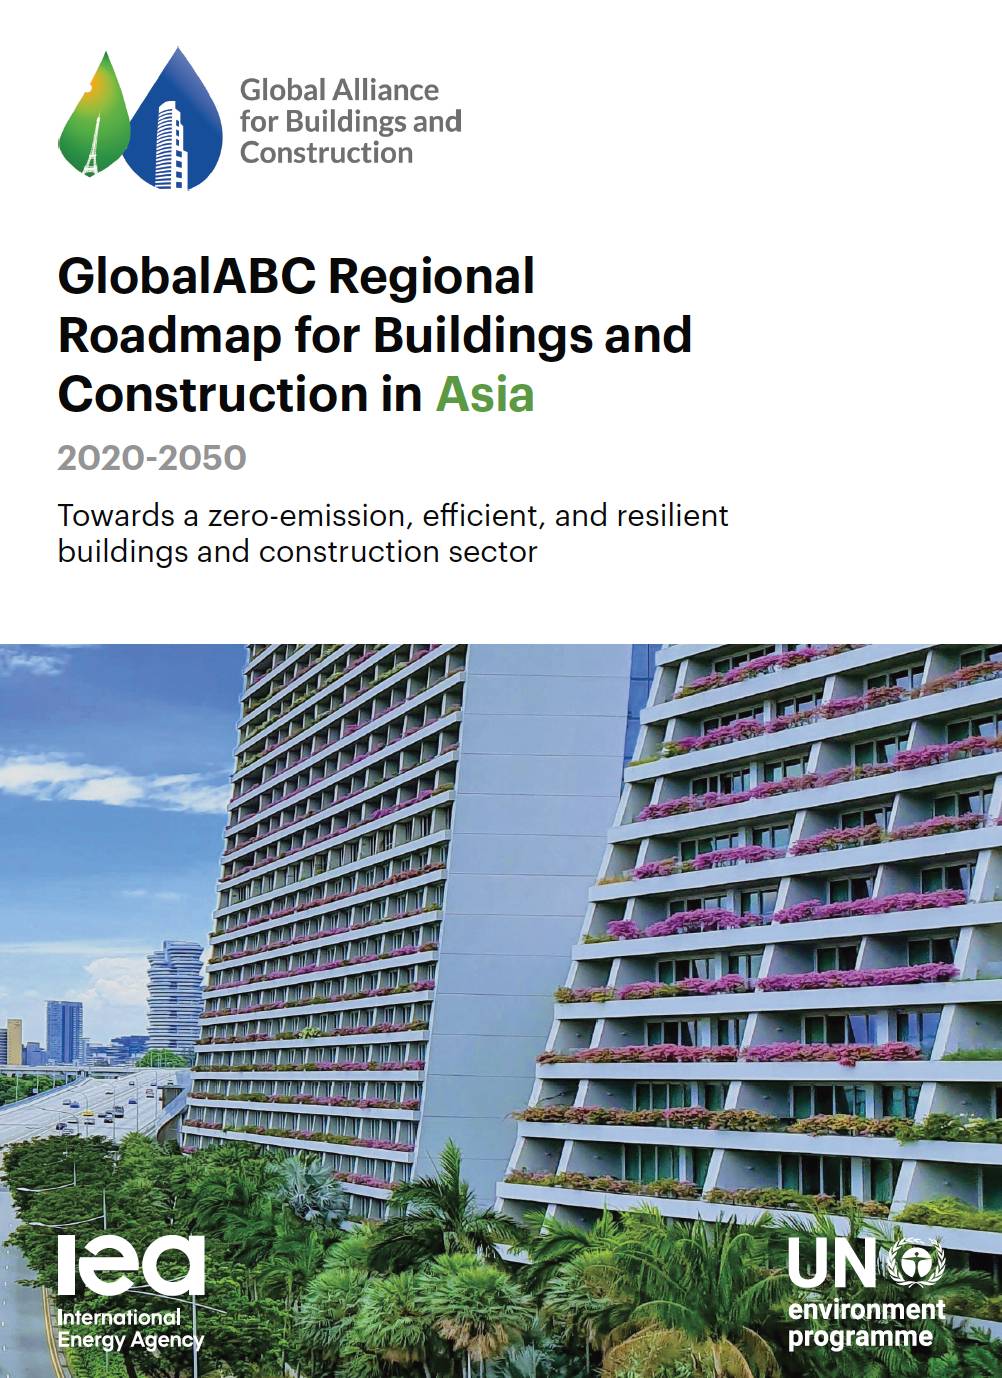 GlobalABC Regional Roadmap for Buildings and Construction in Asia